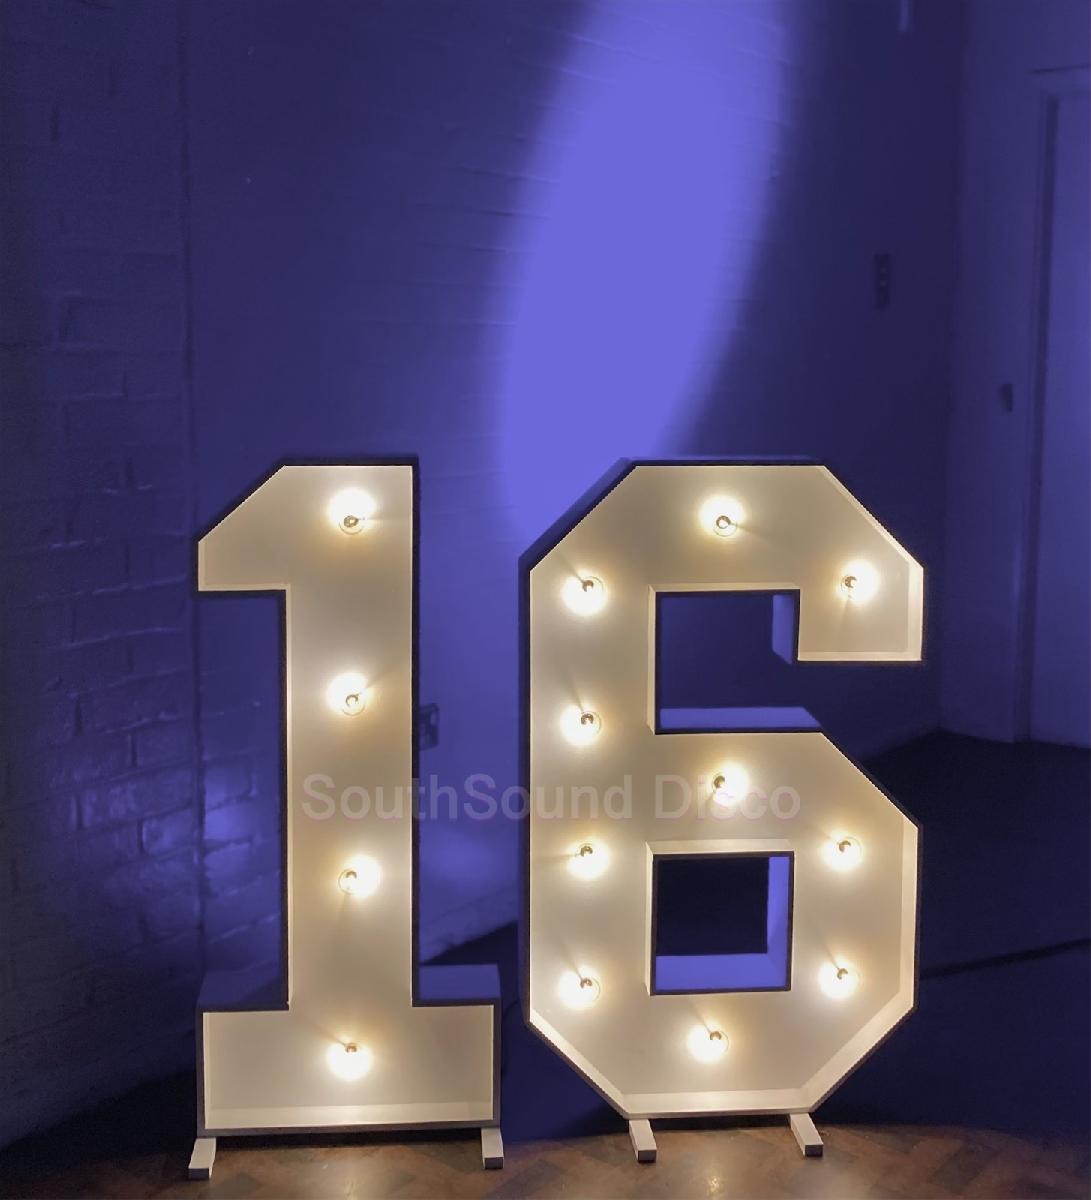 SouthSound disco Marquee Number hire for birthdays